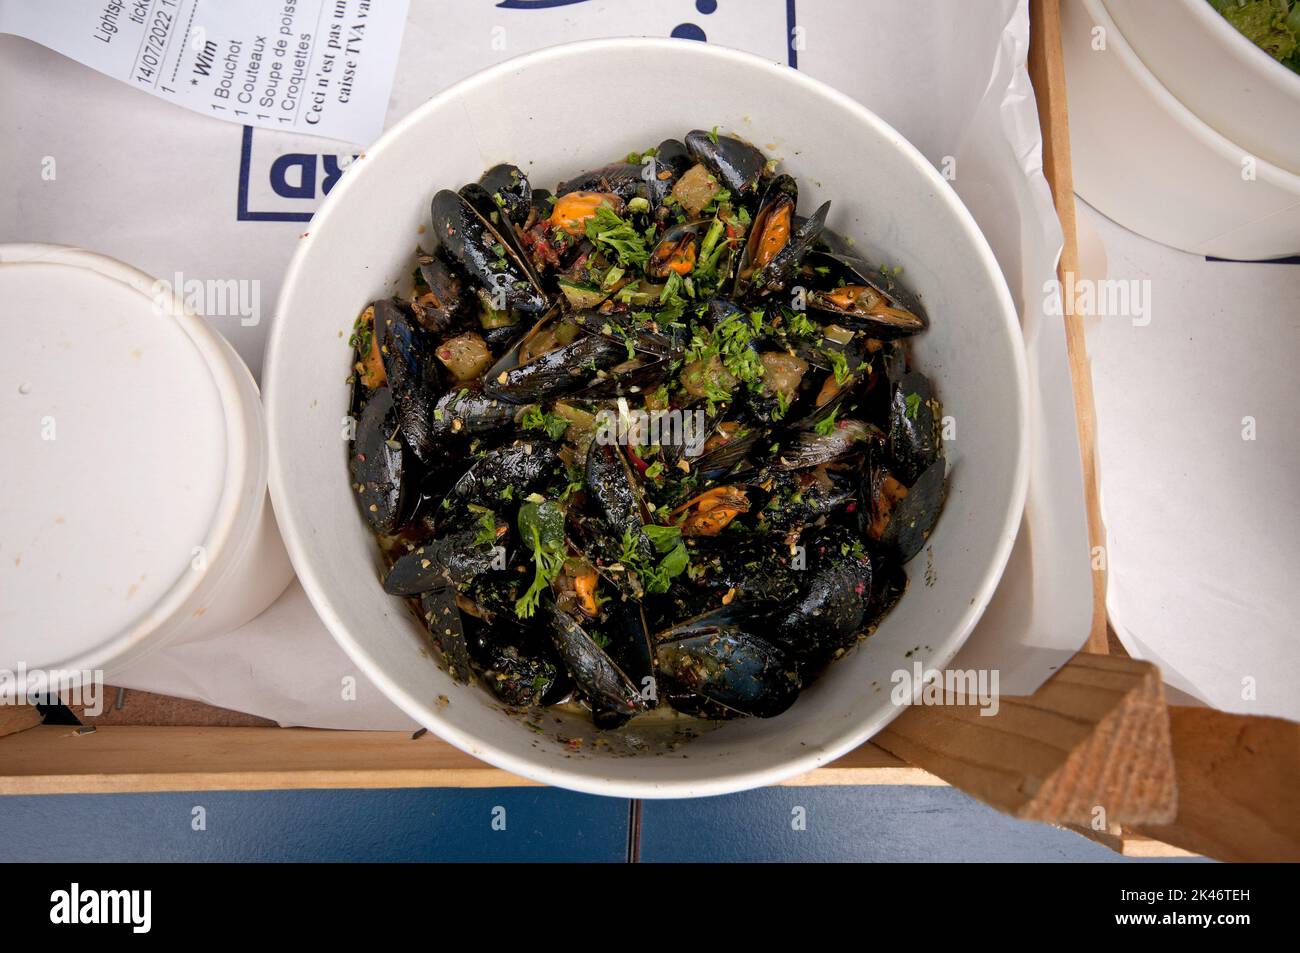 Mussels with herbs and vegetables in a seafood restaurant, Brussels, Belgium Stock Photo